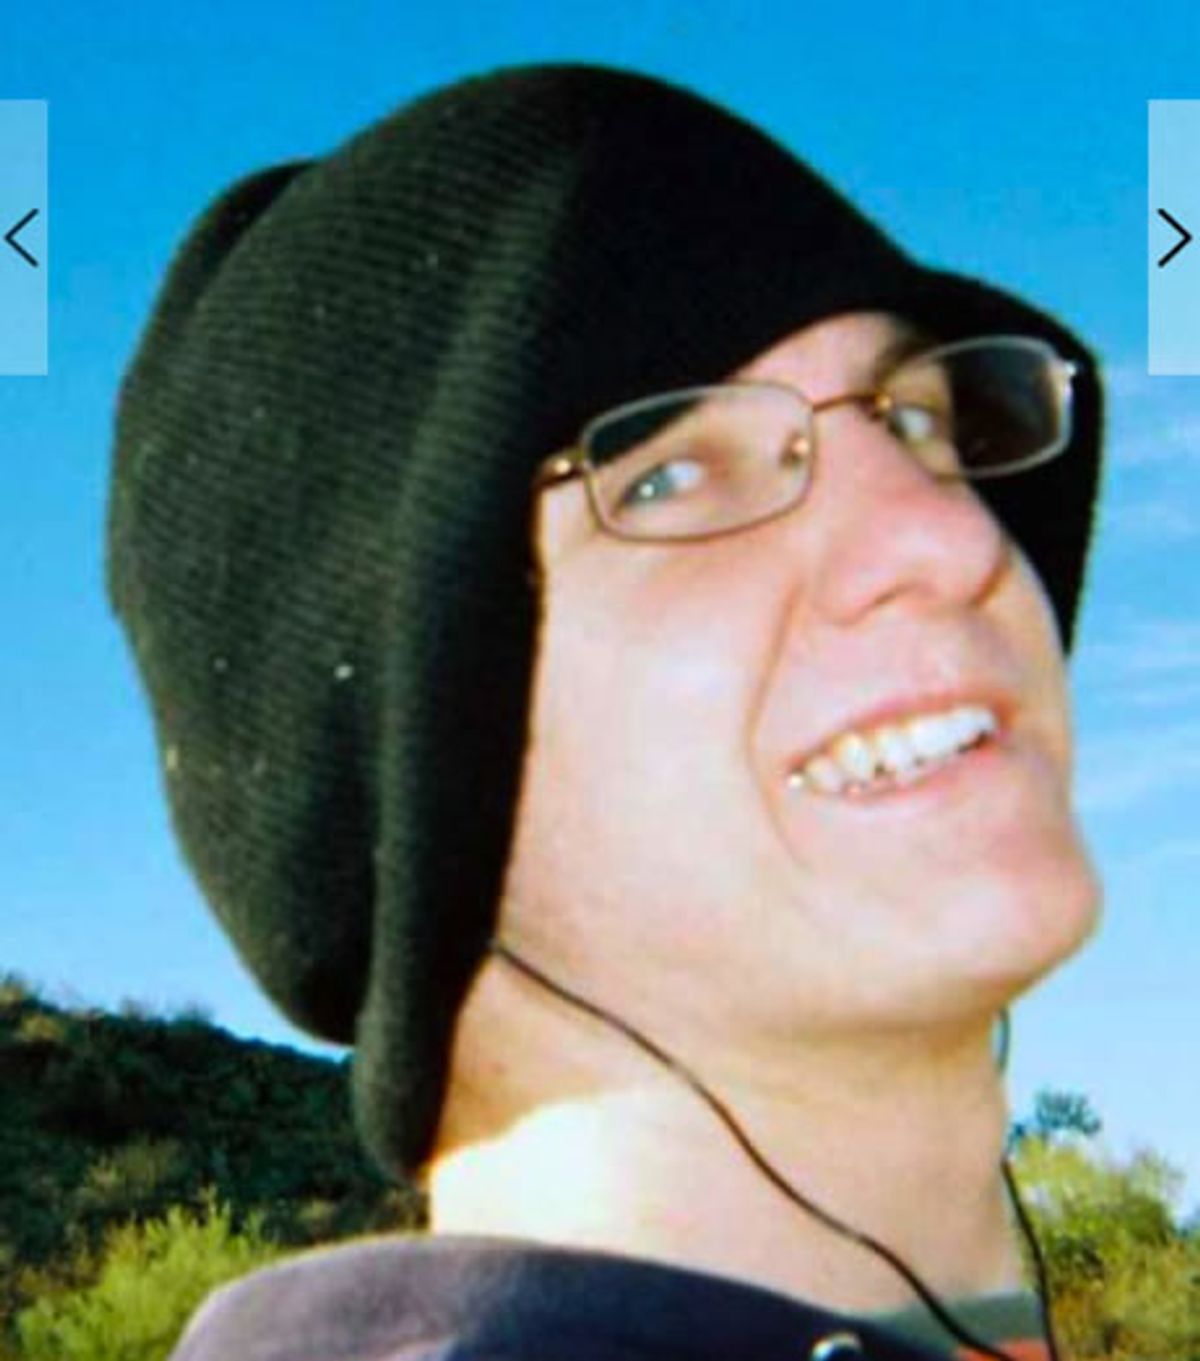 The profile picture from Jared Loughner's MySpace page, which has since been deleted.